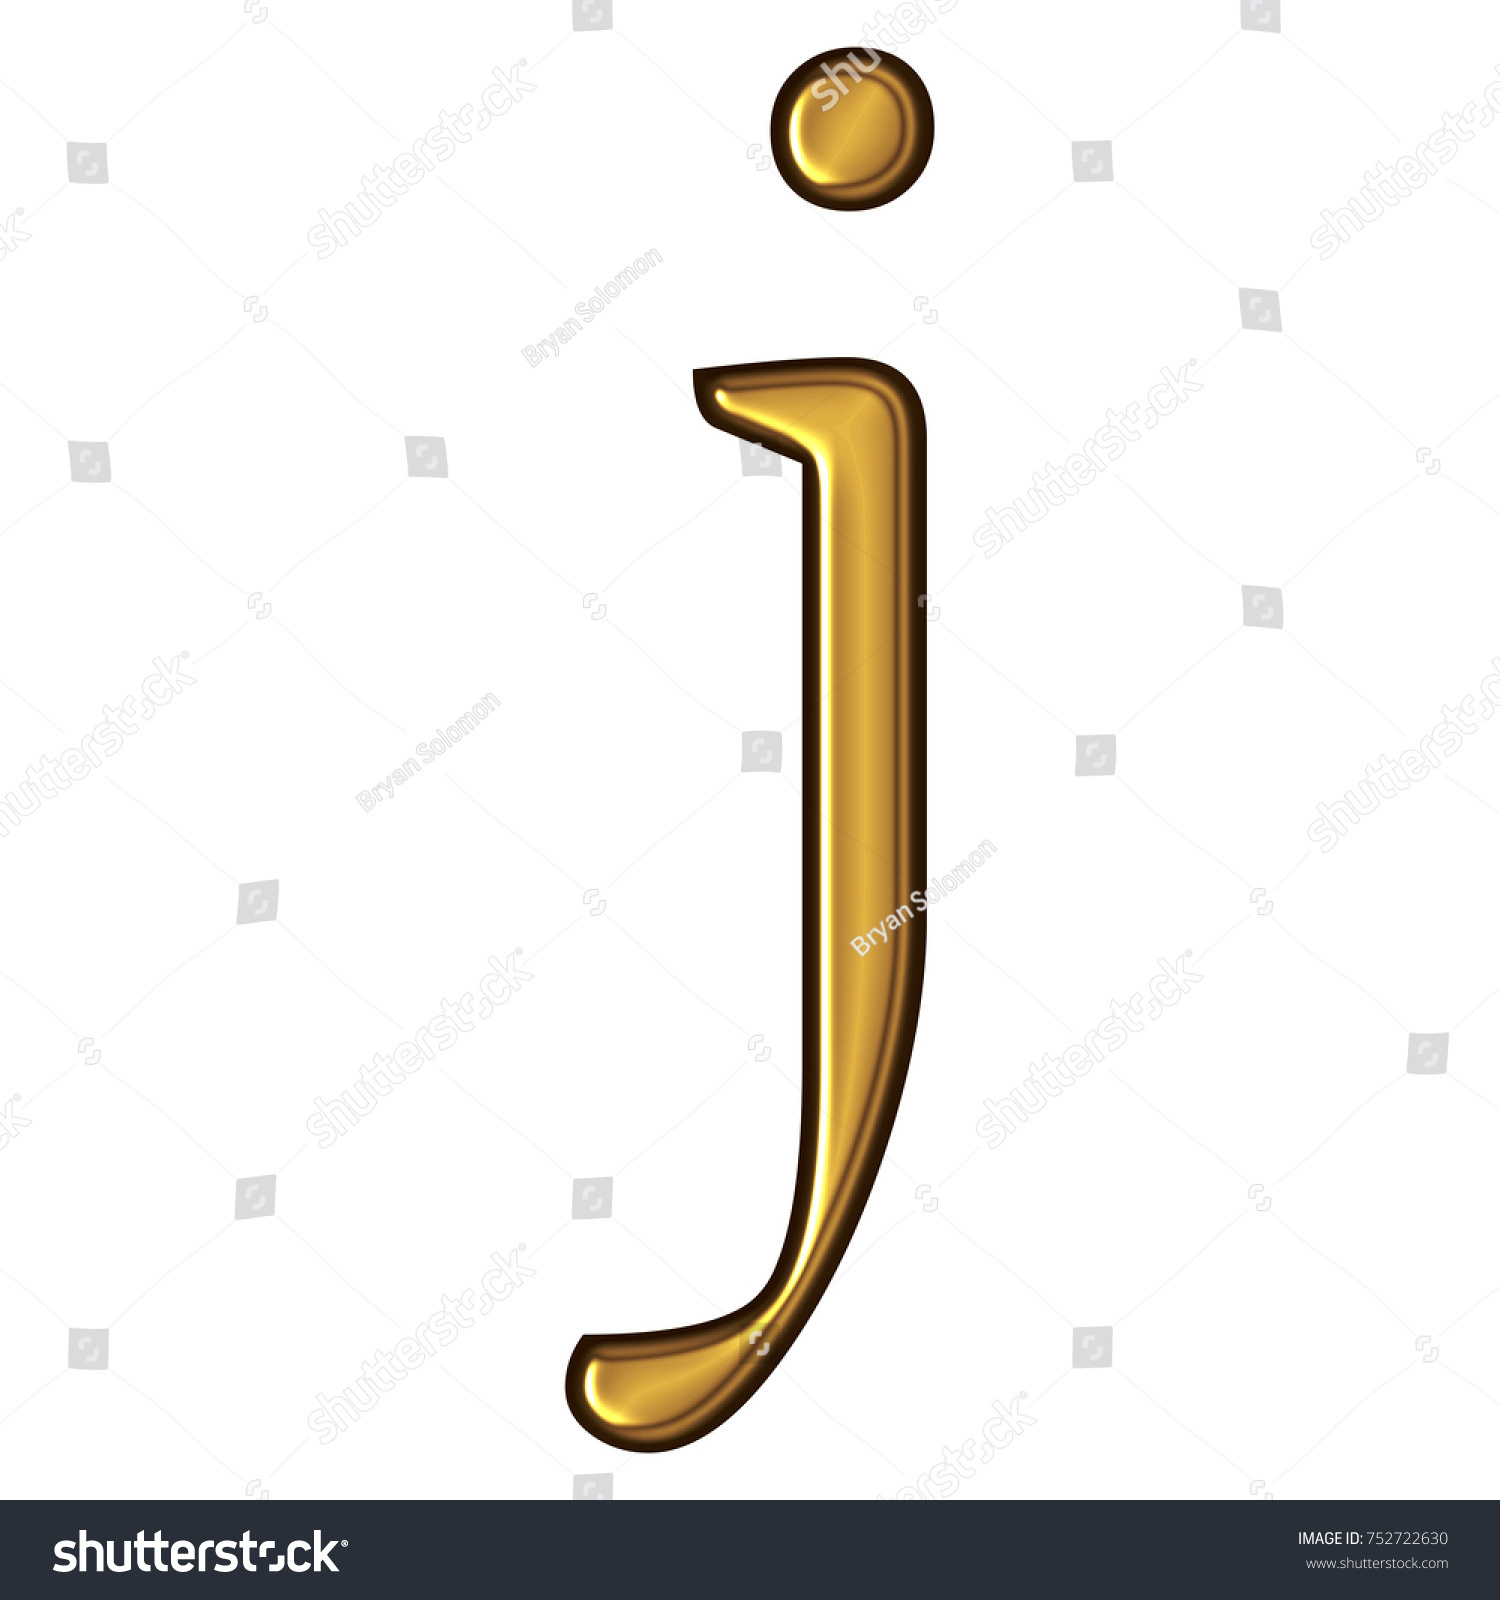 Textured Golden Lowercase Or Small Letter J In A 3d Illustration